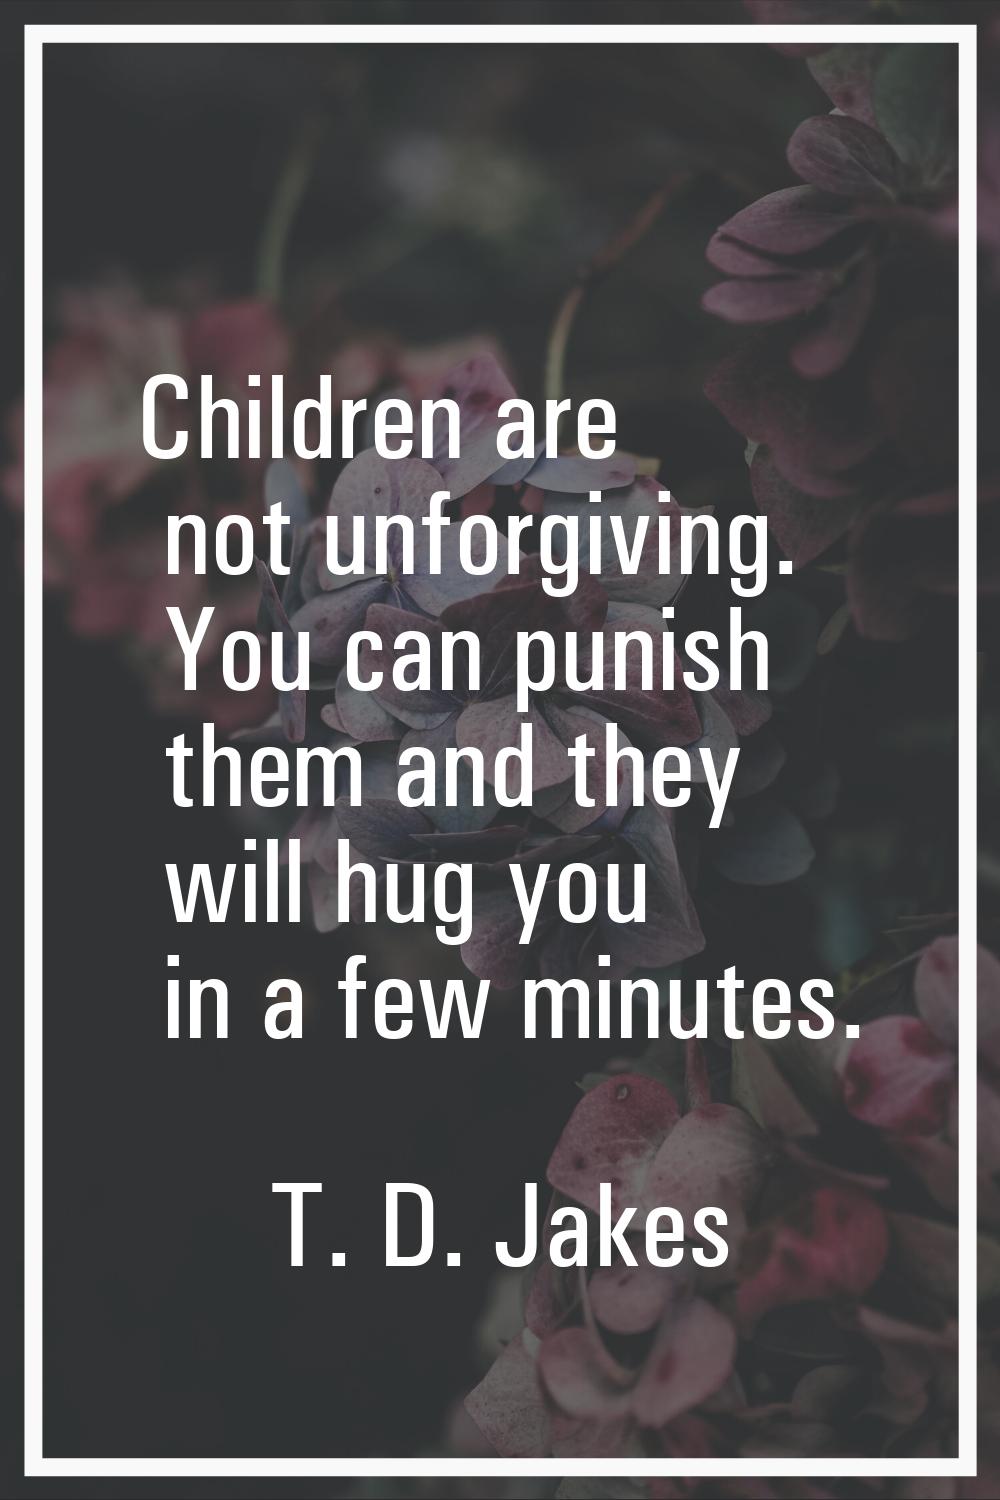 Children are not unforgiving. You can punish them and they will hug you in a few minutes.